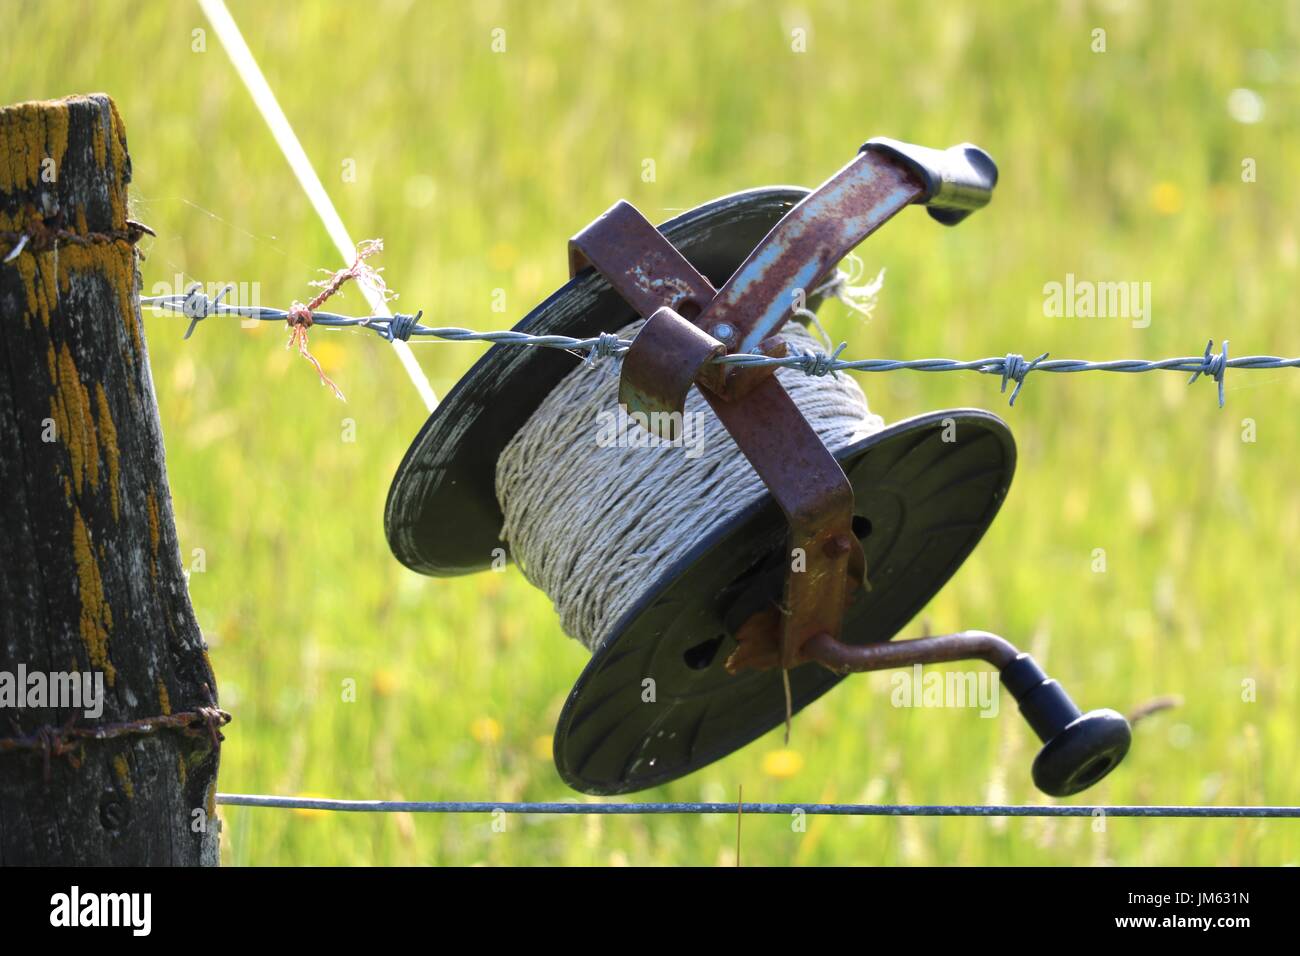 Roll of electric fence tape hooked to fence Stock Photo - Alamy